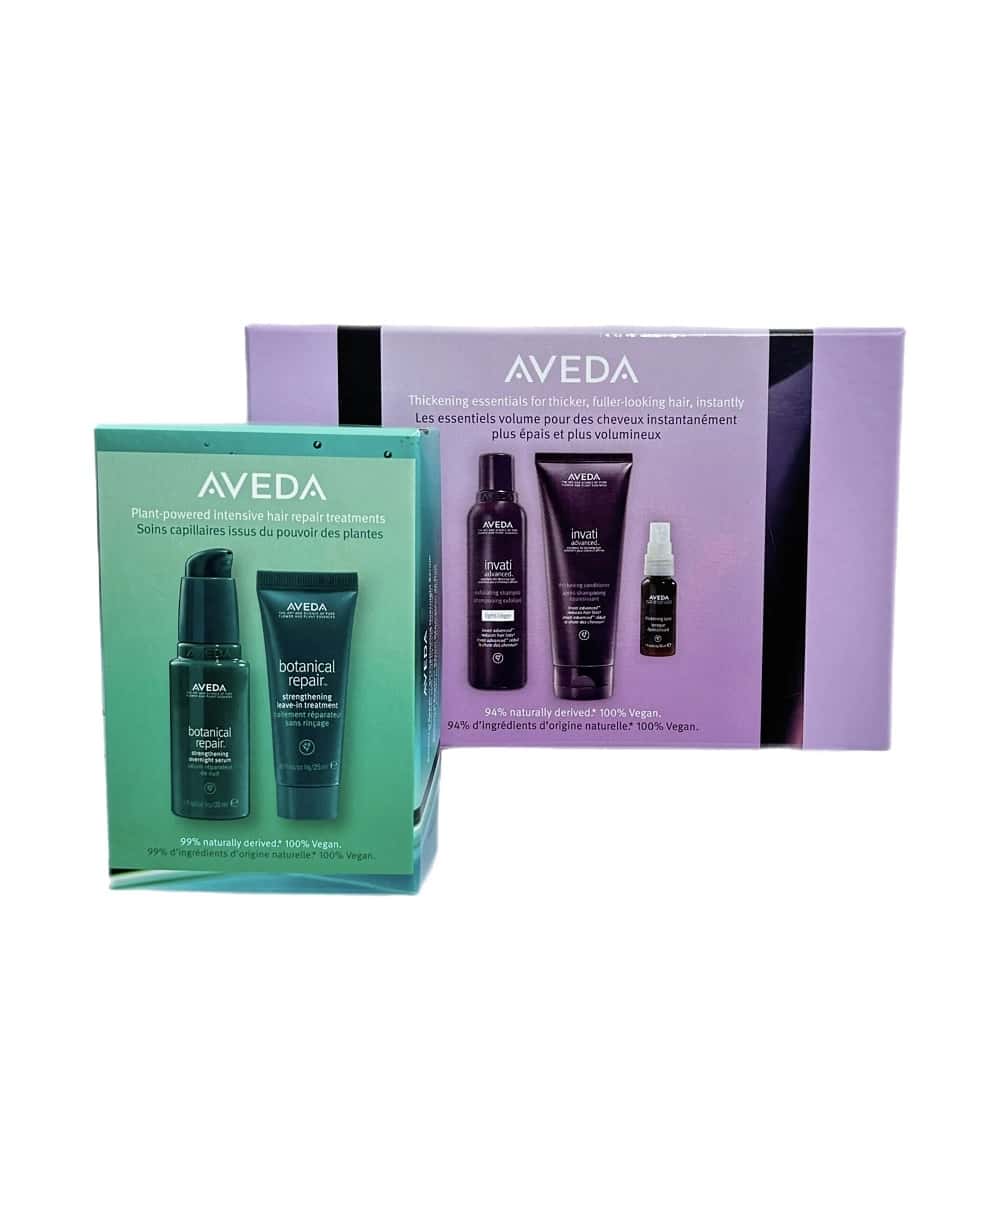 Robinson to create luxury packaging for AVEDA